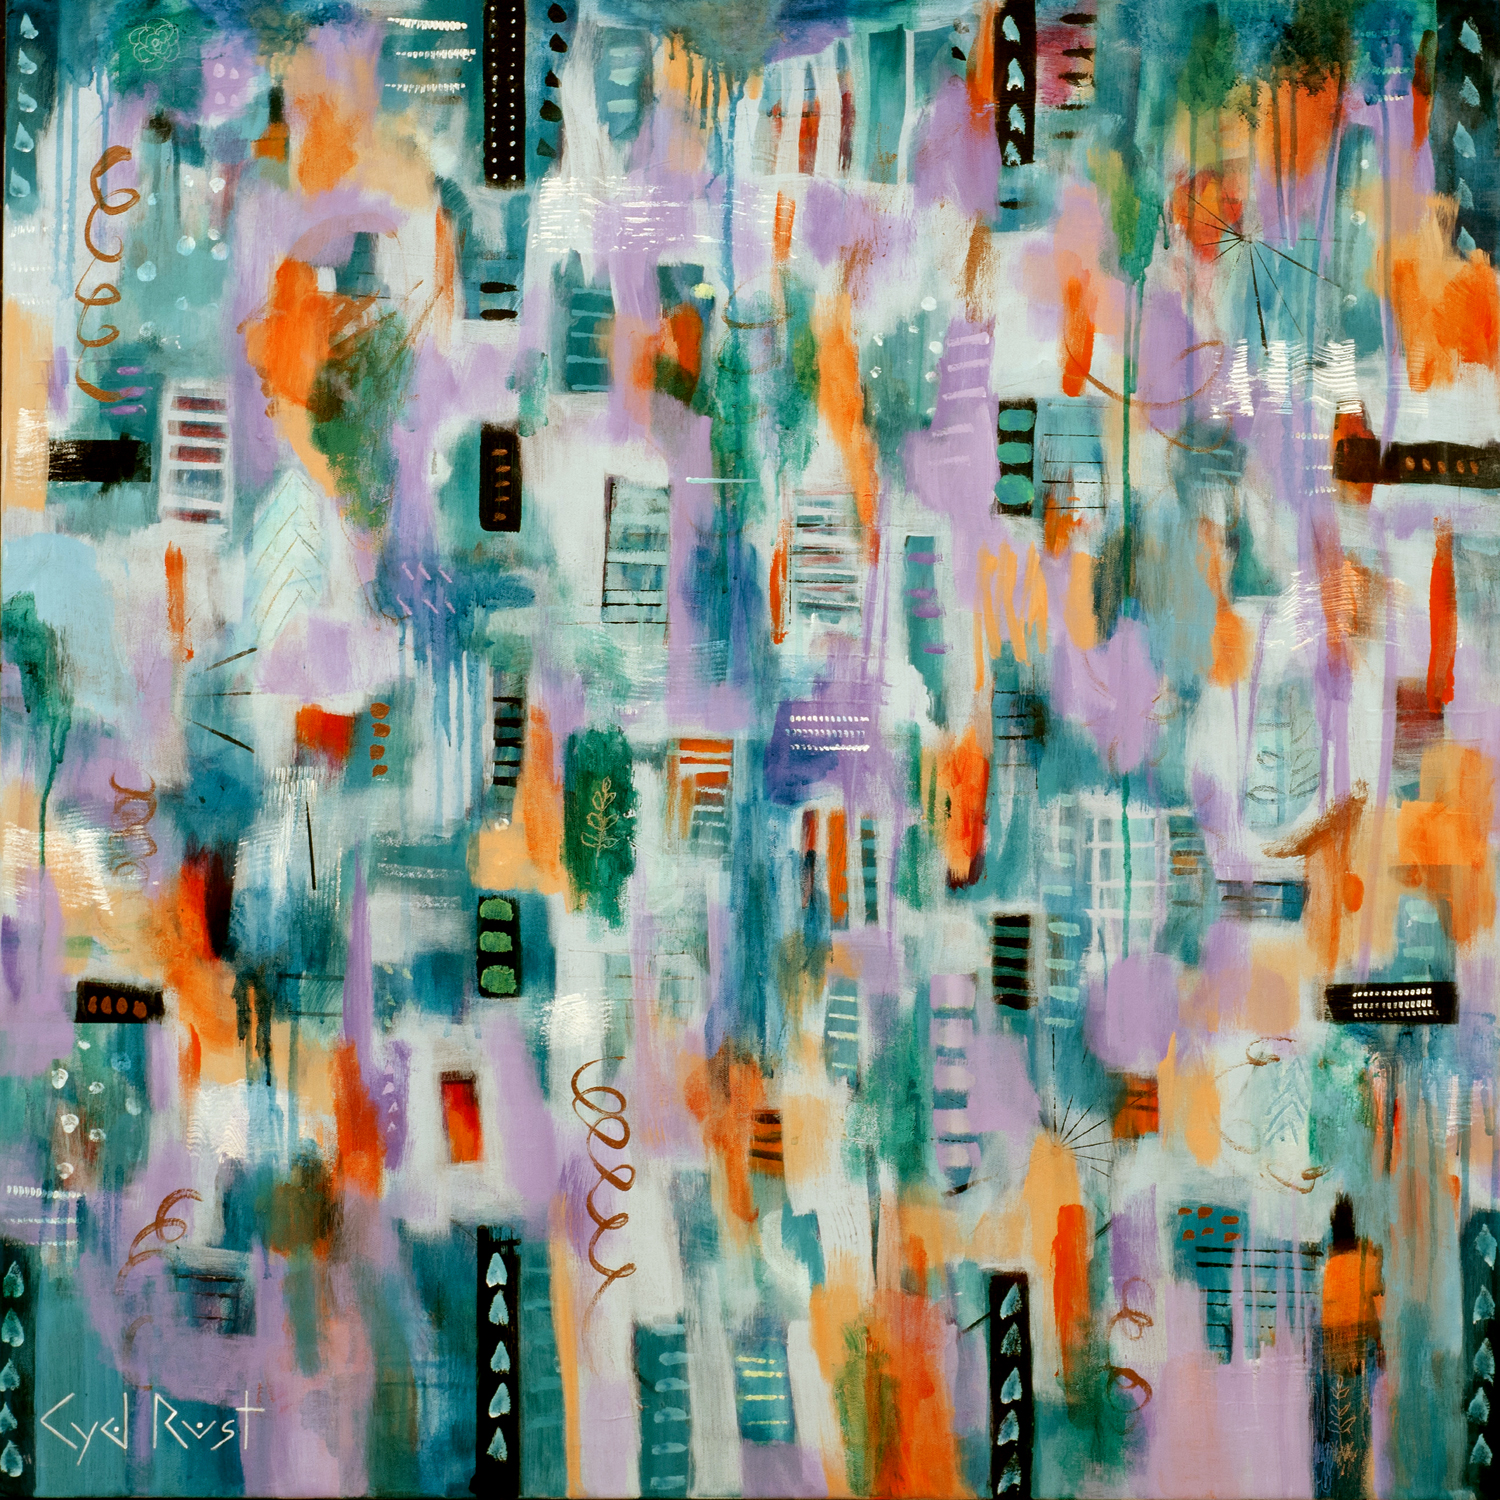 COMING INTO FOCUS ©Cyd Rust: A 36" x 36" Acrylic Painting on Gallery Wrapped Canvas